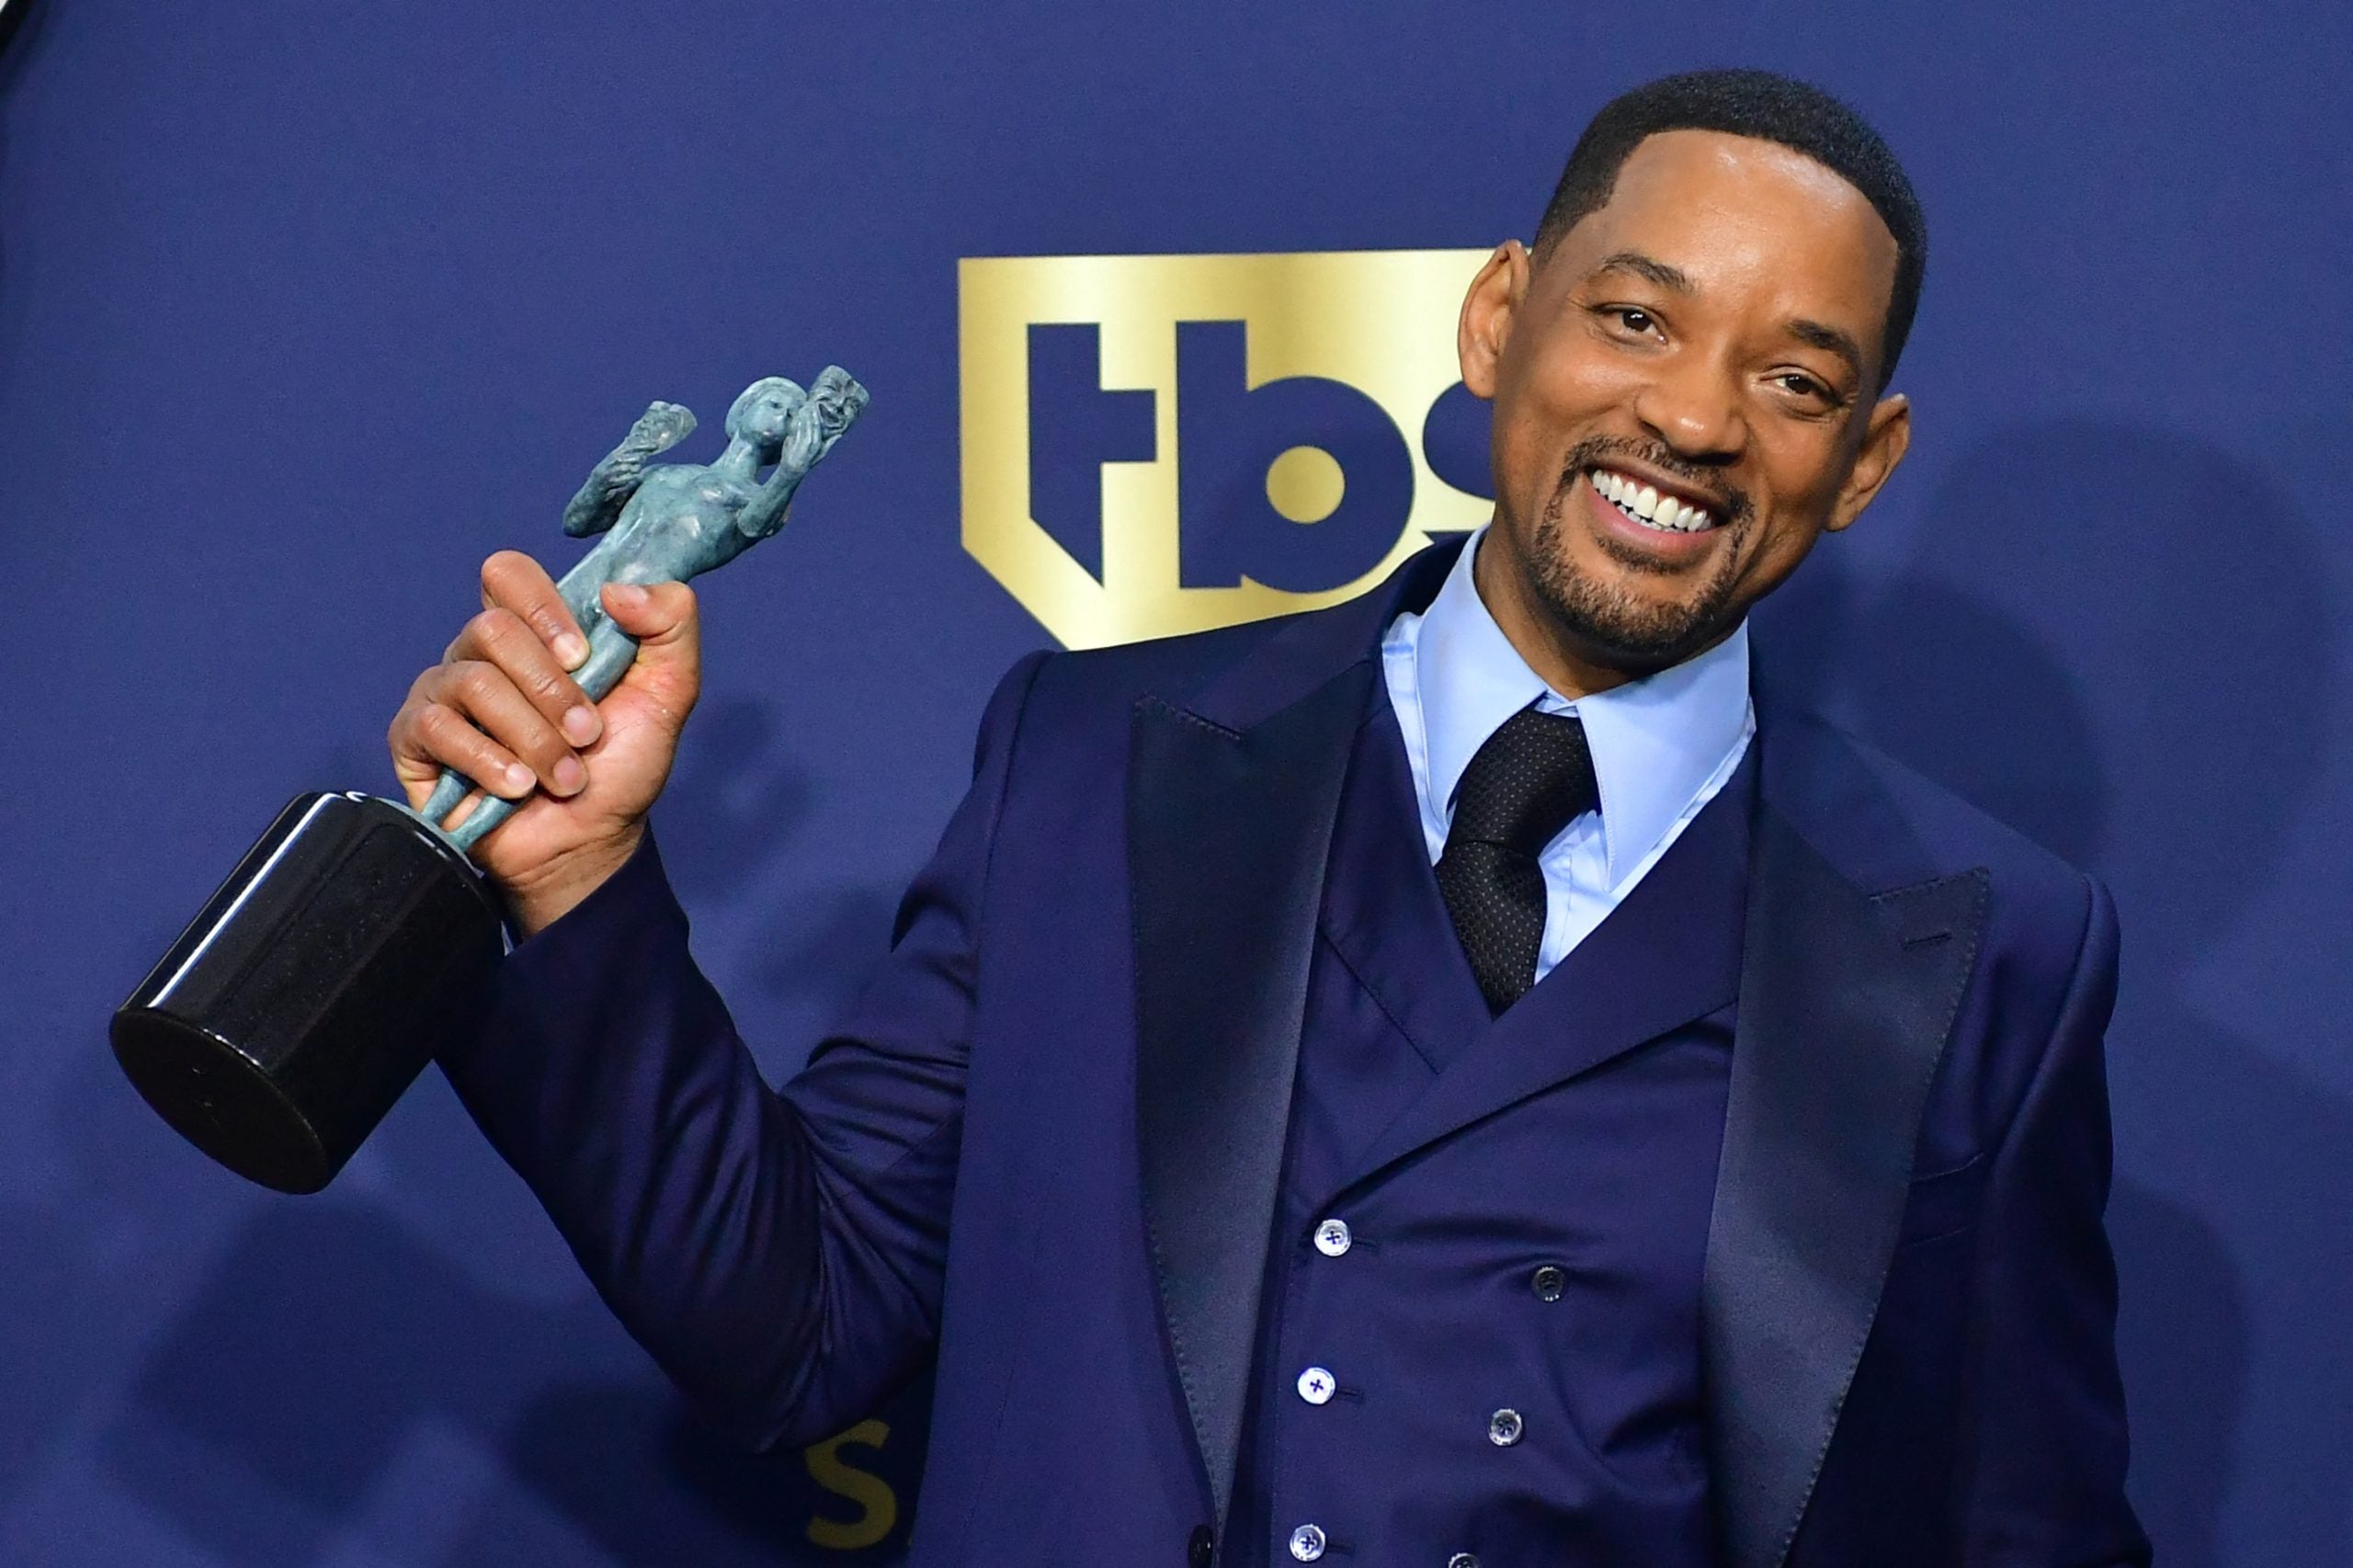 WATCH: Will Smith Discusses His Latest 'Growth Spurt' After Emotional SAG Awards Win